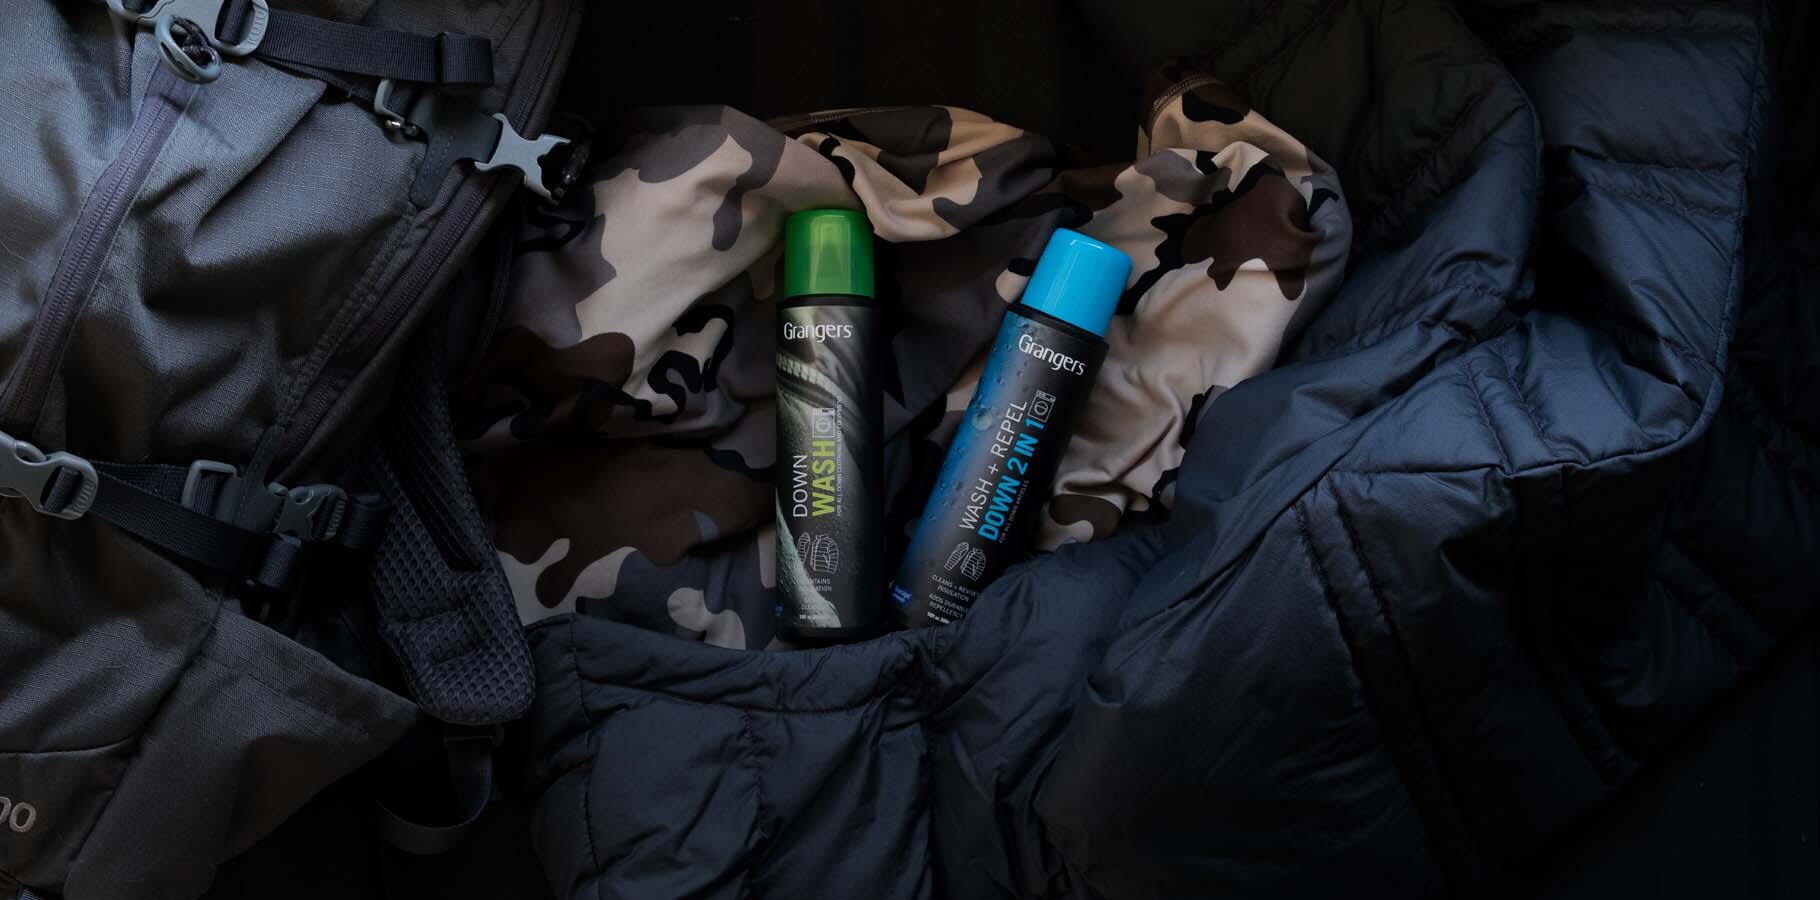 Grangers Wash + DWR Repel 2 in 1 Bottle Small